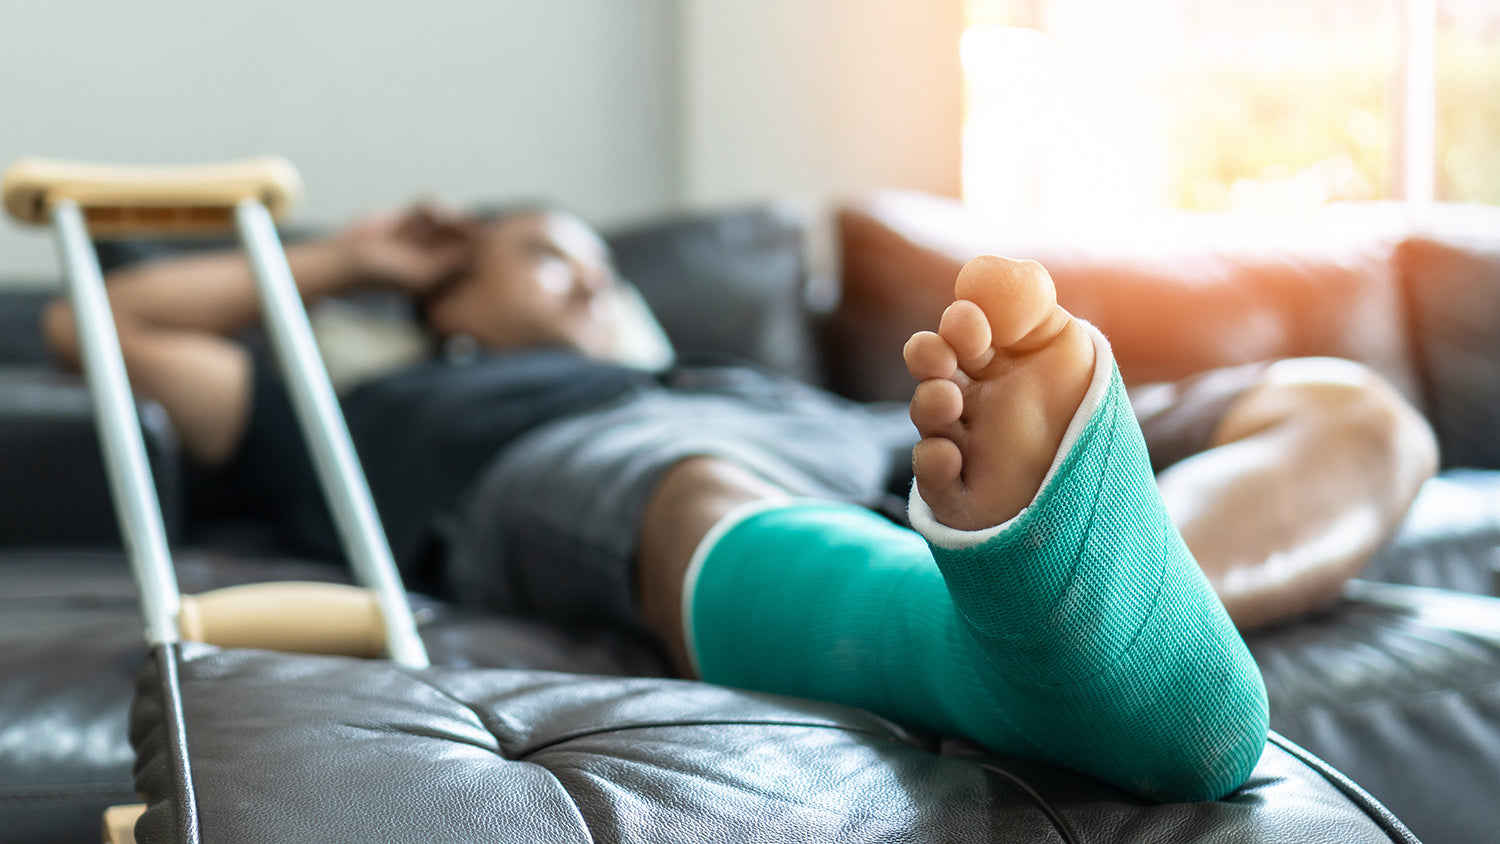 Can CBD Provide Support for Those With Body Injuries?